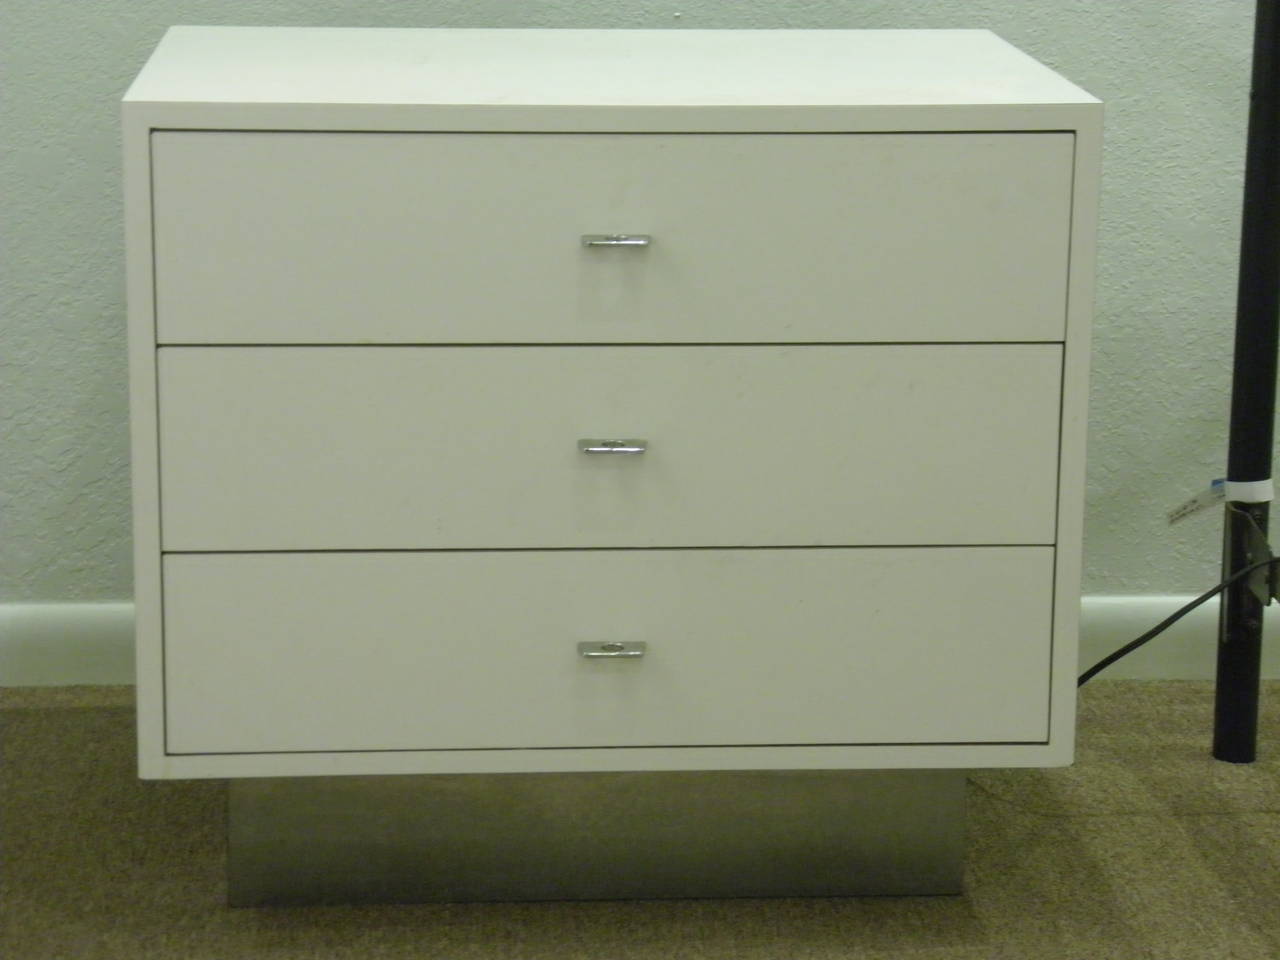 1970s vintage Mid Century Modern Milo Baughman Style White Lacquered Pair of Chests or Night Stands with natural wood interior drawers with original modern chrome pulls. Each chest is fitted with three spacious wood drawers on a matte chrome plinth